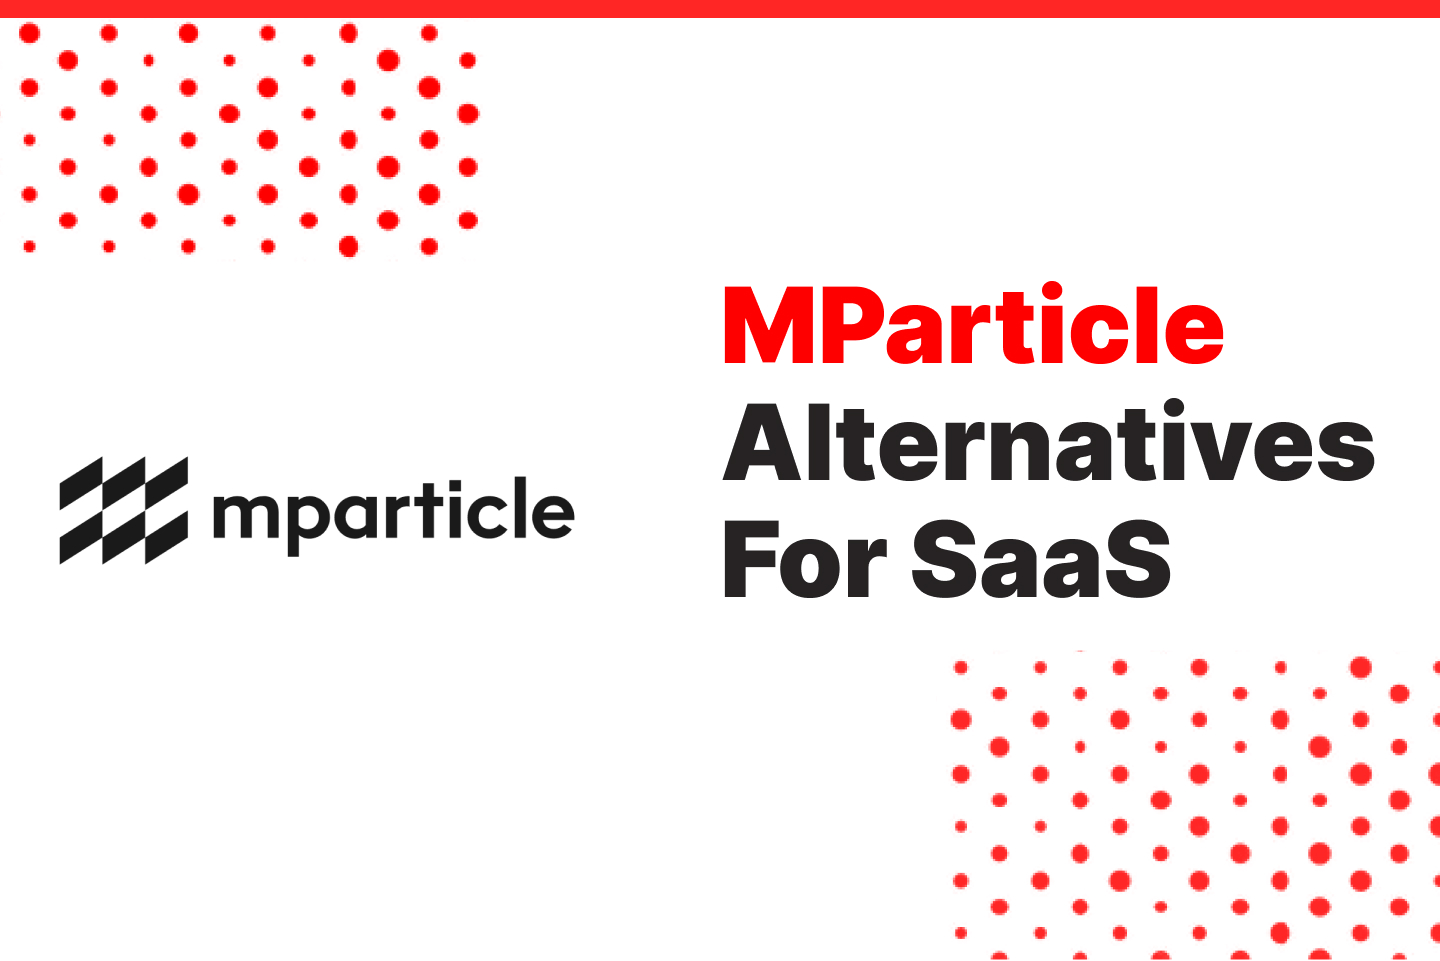 MParticle Alternatives